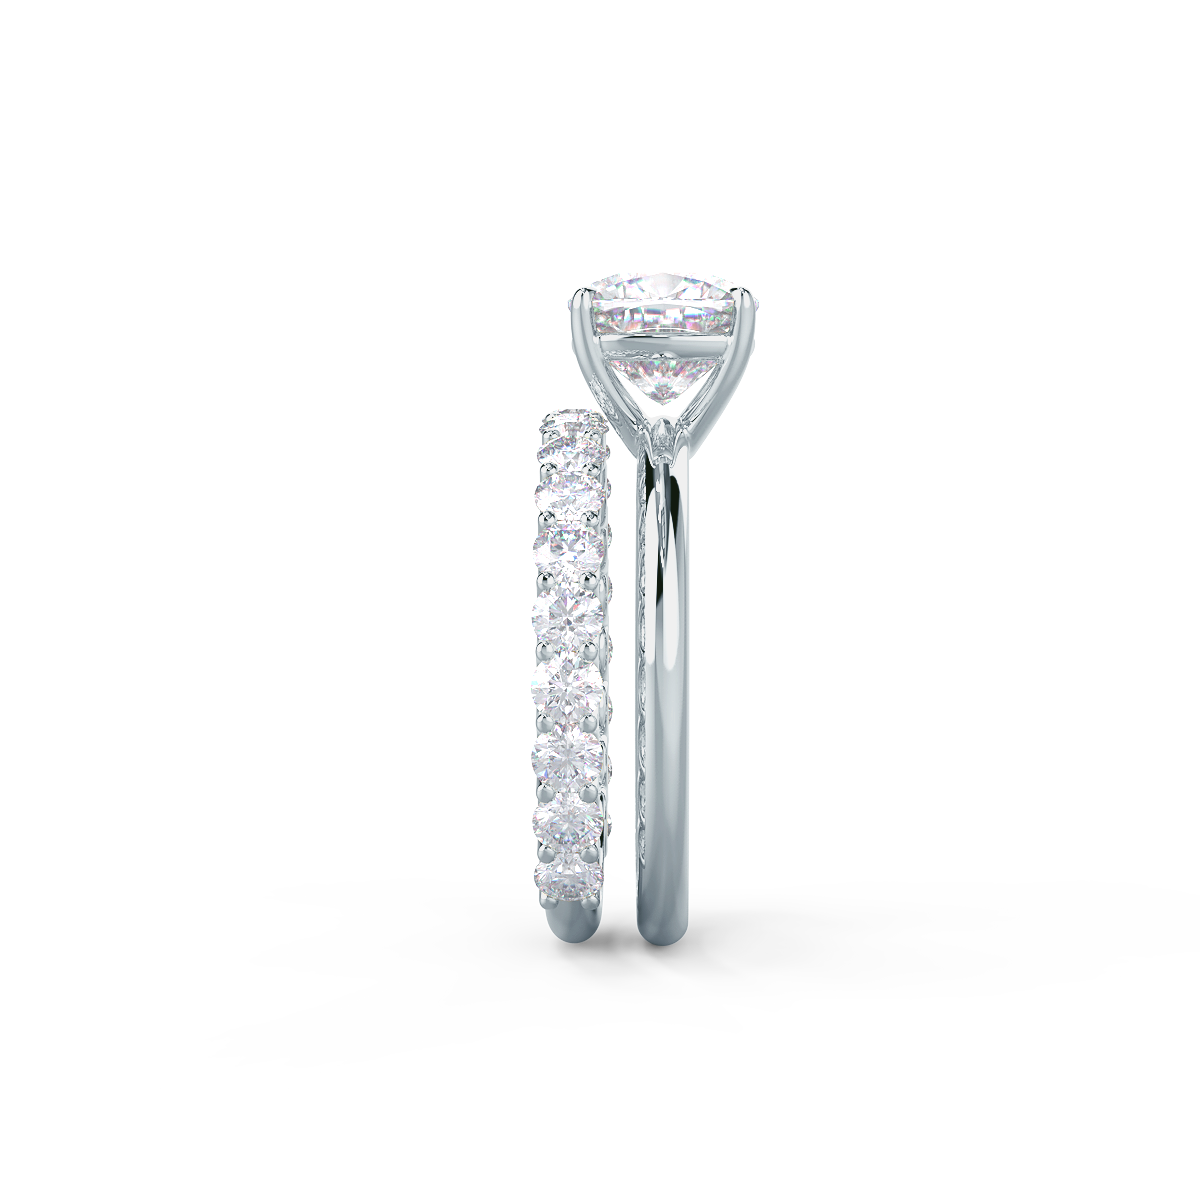   This setting pairs with a variety of wedding band styles.     Shop All Wedding Bands   